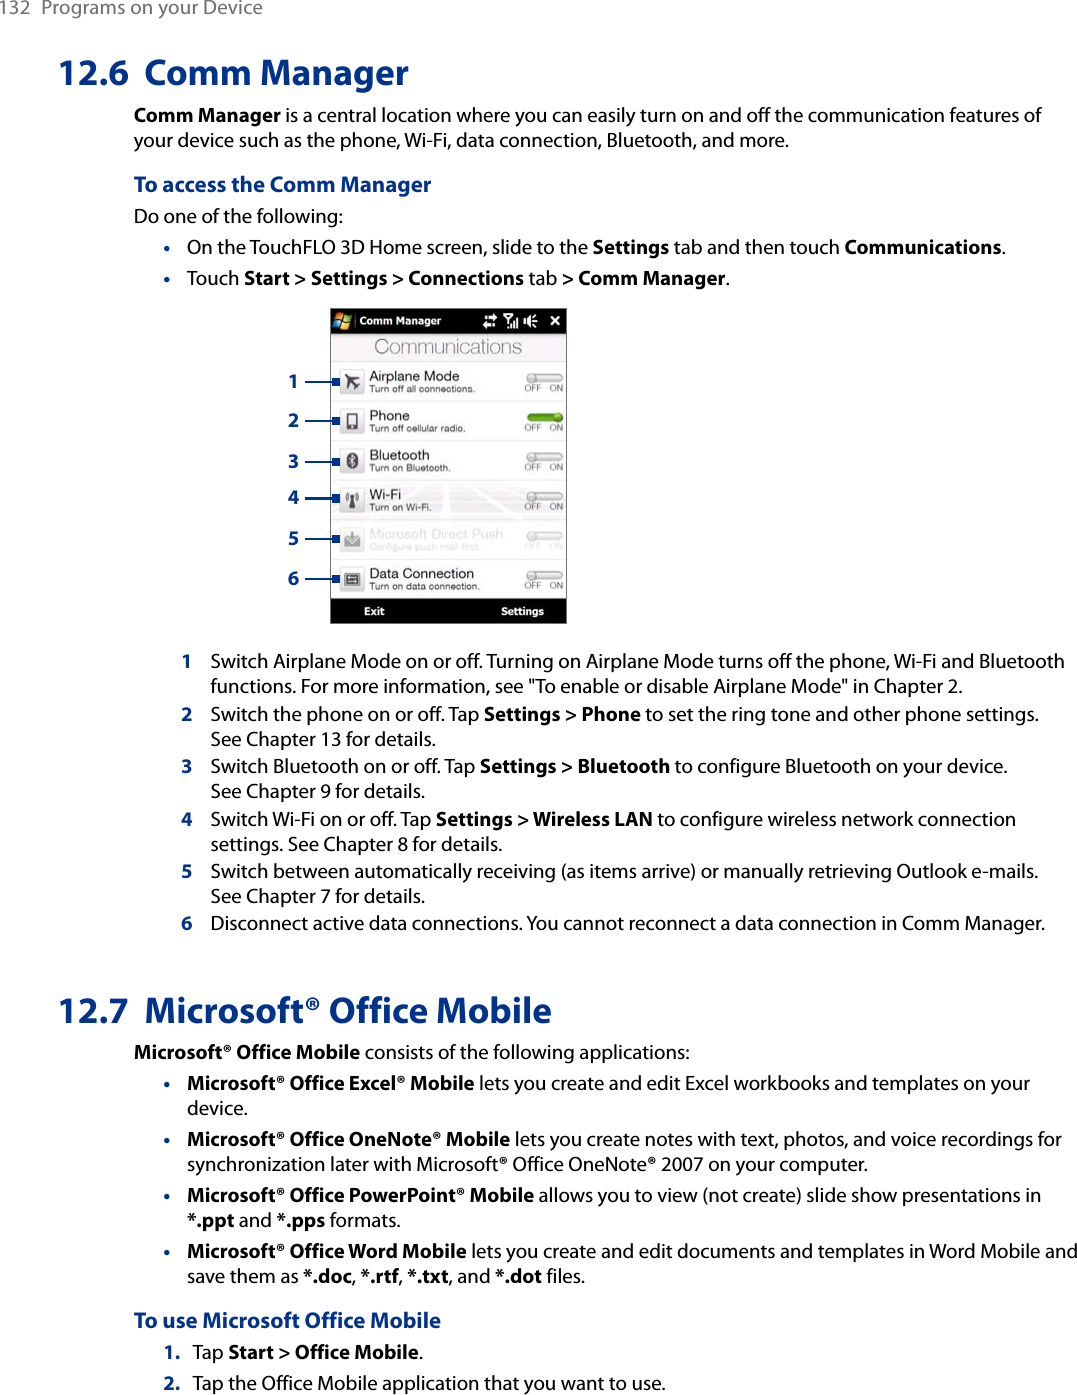 132  Programs on your Device12.6  Comm ManagerComm Manager is a central location where you can easily turn on and off the communication features of your device such as the phone, Wi-Fi, data connection, Bluetooth, and more.To access the Comm ManagerDo one of the following:On the TouchFLO 3D Home screen, slide to the Settings tab and then touch Communications.Touch Start &gt; Settings &gt; Connections tab &gt; Comm Manager.   1234561Switch Airplane Mode on or off. Turning on Airplane Mode turns off the phone, Wi-Fi and Bluetooth functions. For more information, see &quot;To enable or disable Airplane Mode&quot; in Chapter 2.2Switch the phone on or off. Tap Settings &gt; Phone to set the ring tone and other phone settings.  See Chapter 13 for details. 3Switch Bluetooth on or off. Tap Settings &gt; Bluetooth to configure Bluetooth on your device.  See Chapter 9 for details.4Switch Wi-Fi on or off. Tap Settings &gt; Wireless LAN to configure wireless network connection settings. See Chapter 8 for details.5Switch between automatically receiving (as items arrive) or manually retrieving Outlook e-mails.  See Chapter 7 for details.6Disconnect active data connections. You cannot reconnect a data connection in Comm Manager.12.7  Microsoft® Office MobileMicrosoft® Office Mobile consists of the following applications:Microsoft® Office Excel® Mobile lets you create and edit Excel workbooks and templates on your device.Microsoft® Office OneNote® Mobile lets you create notes with text, photos, and voice recordings for synchronization later with Microsoft® Office OneNote® 2007 on your computer.Microsoft® Office PowerPoint® Mobile allows you to view (not create) slide show presentations in *.ppt and *.pps formats.Microsoft® Office Word Mobile lets you create and edit documents and templates in Word Mobile and save them as *.doc, *.rtf, *.txt, and *.dot files.To use Microsoft Office Mobile1.  Tap Start &gt; Office Mobile.2.  Tap the Office Mobile application that you want to use.••••••